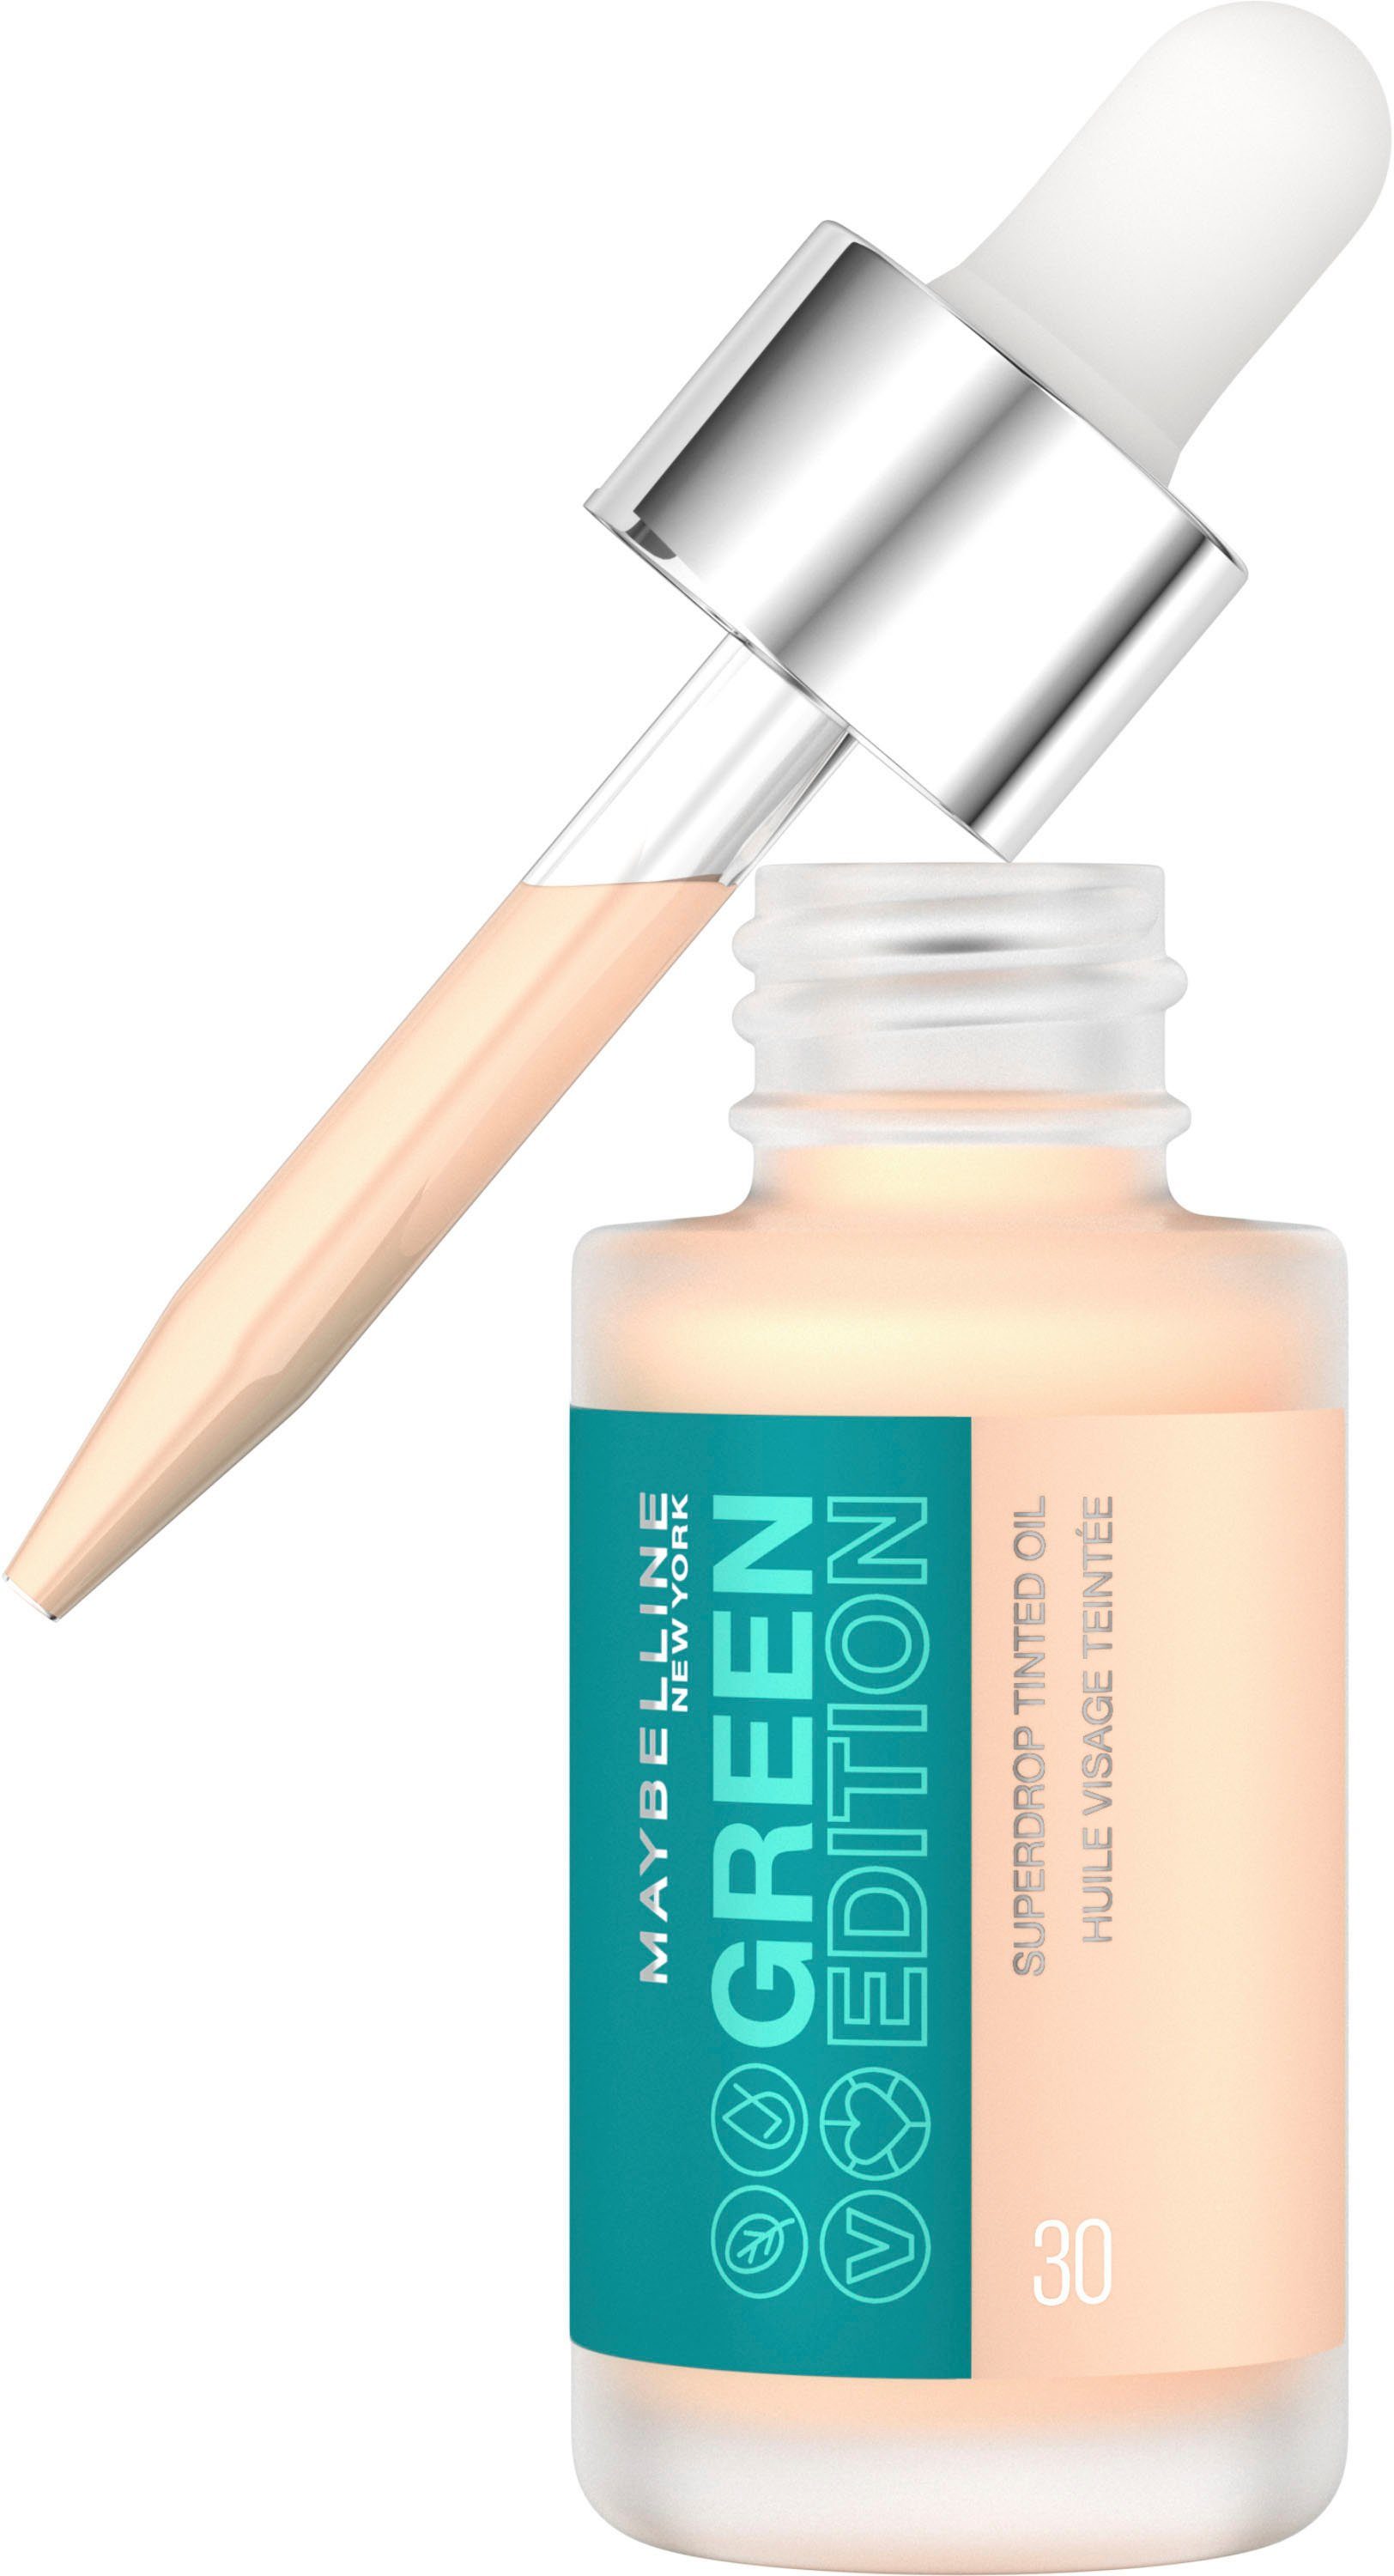 NEW Tinted TINT GREEN DRY Superdrop YORK MAYBELLINE OIL Oil Dry Foundation 30 ED